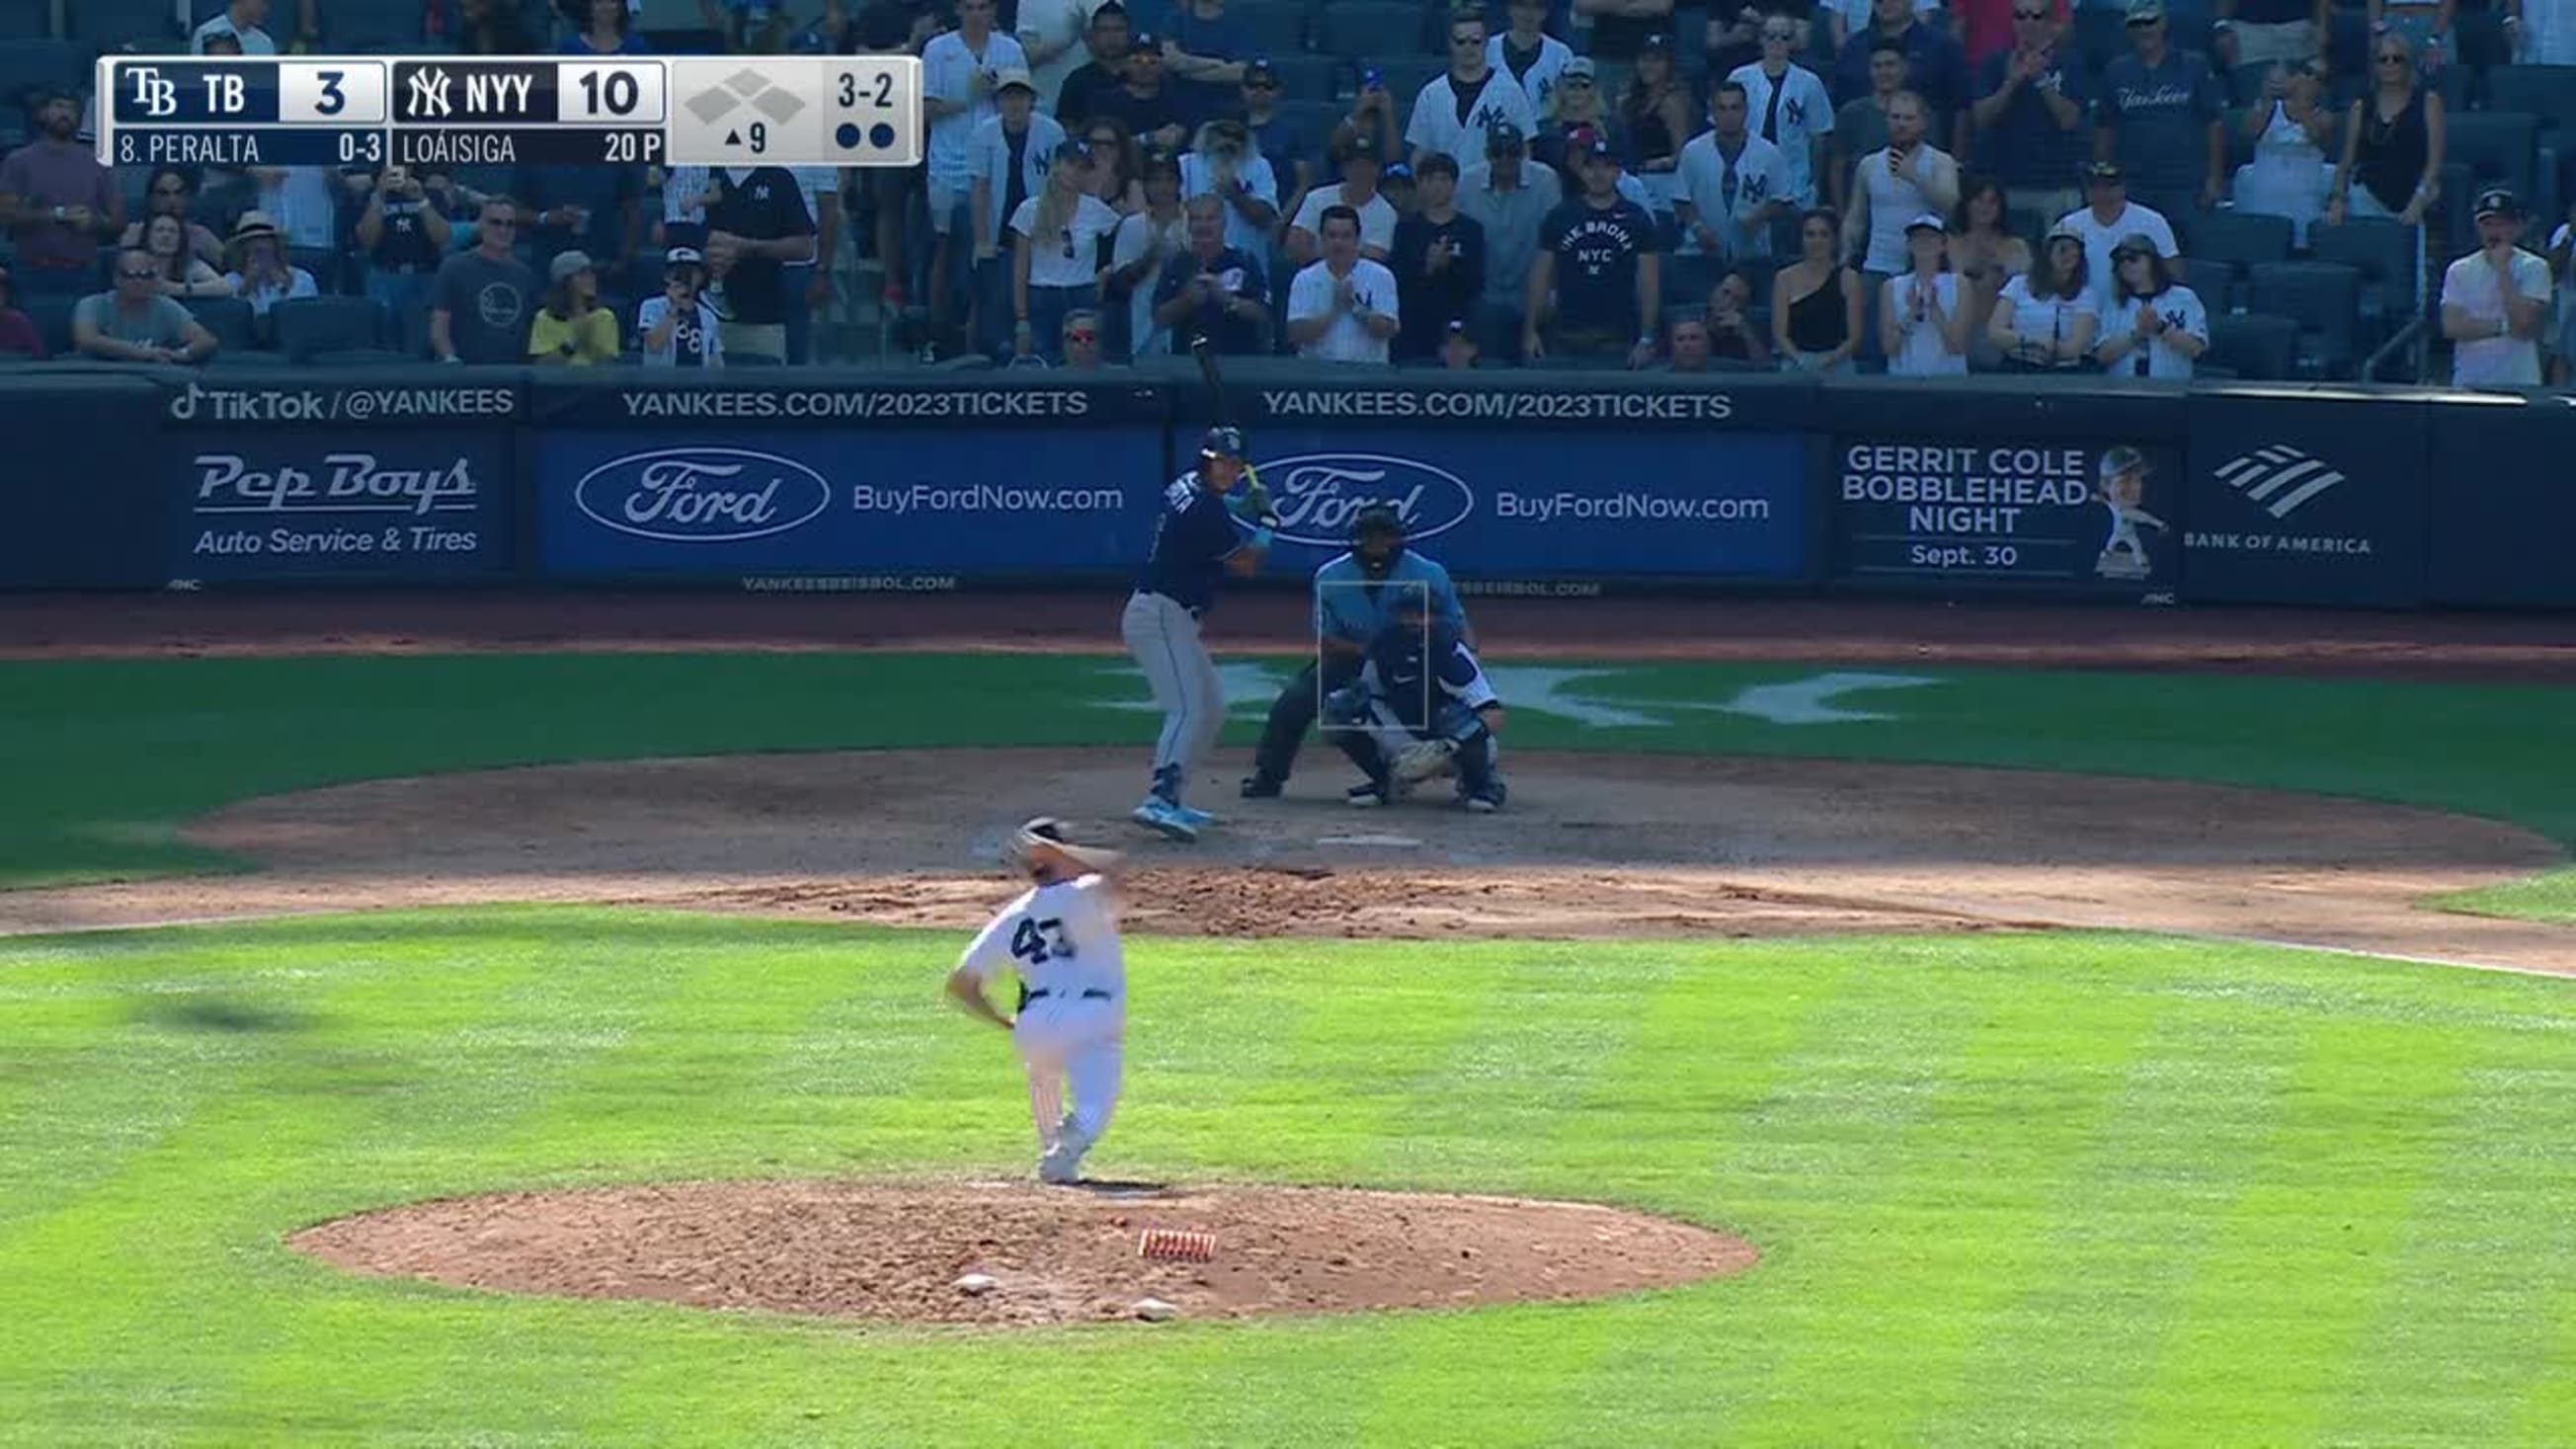 Jonathan Loaisiga gets final out, 09/10/2022